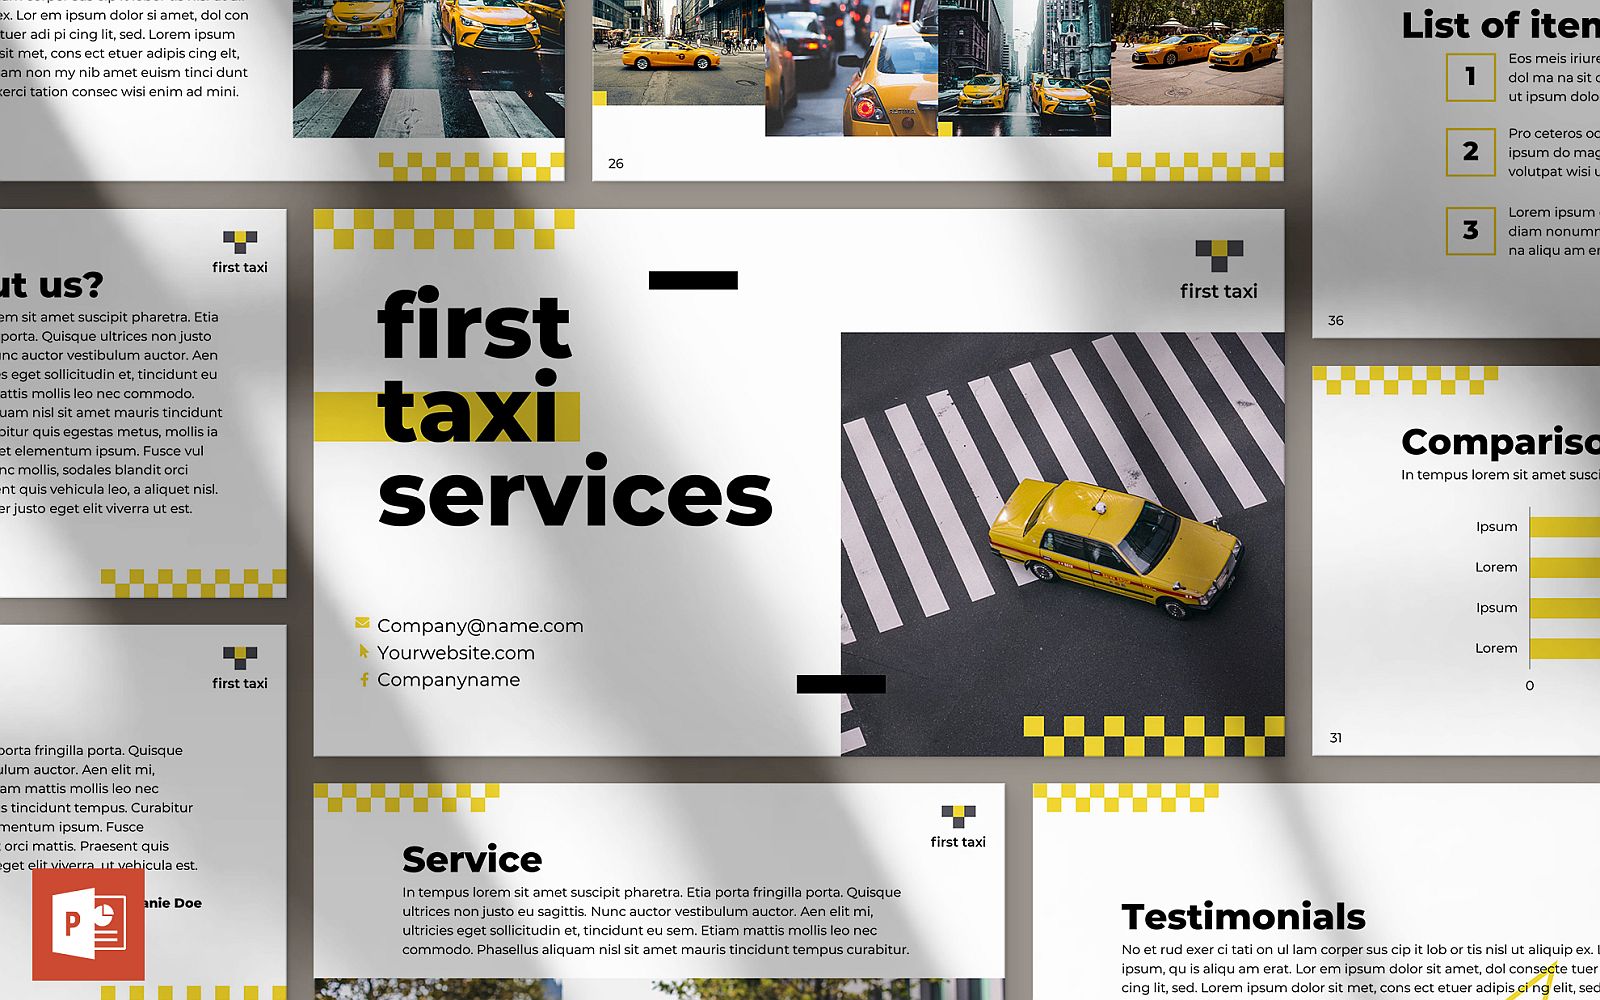 Taxi Service Presentation PowerPoint template